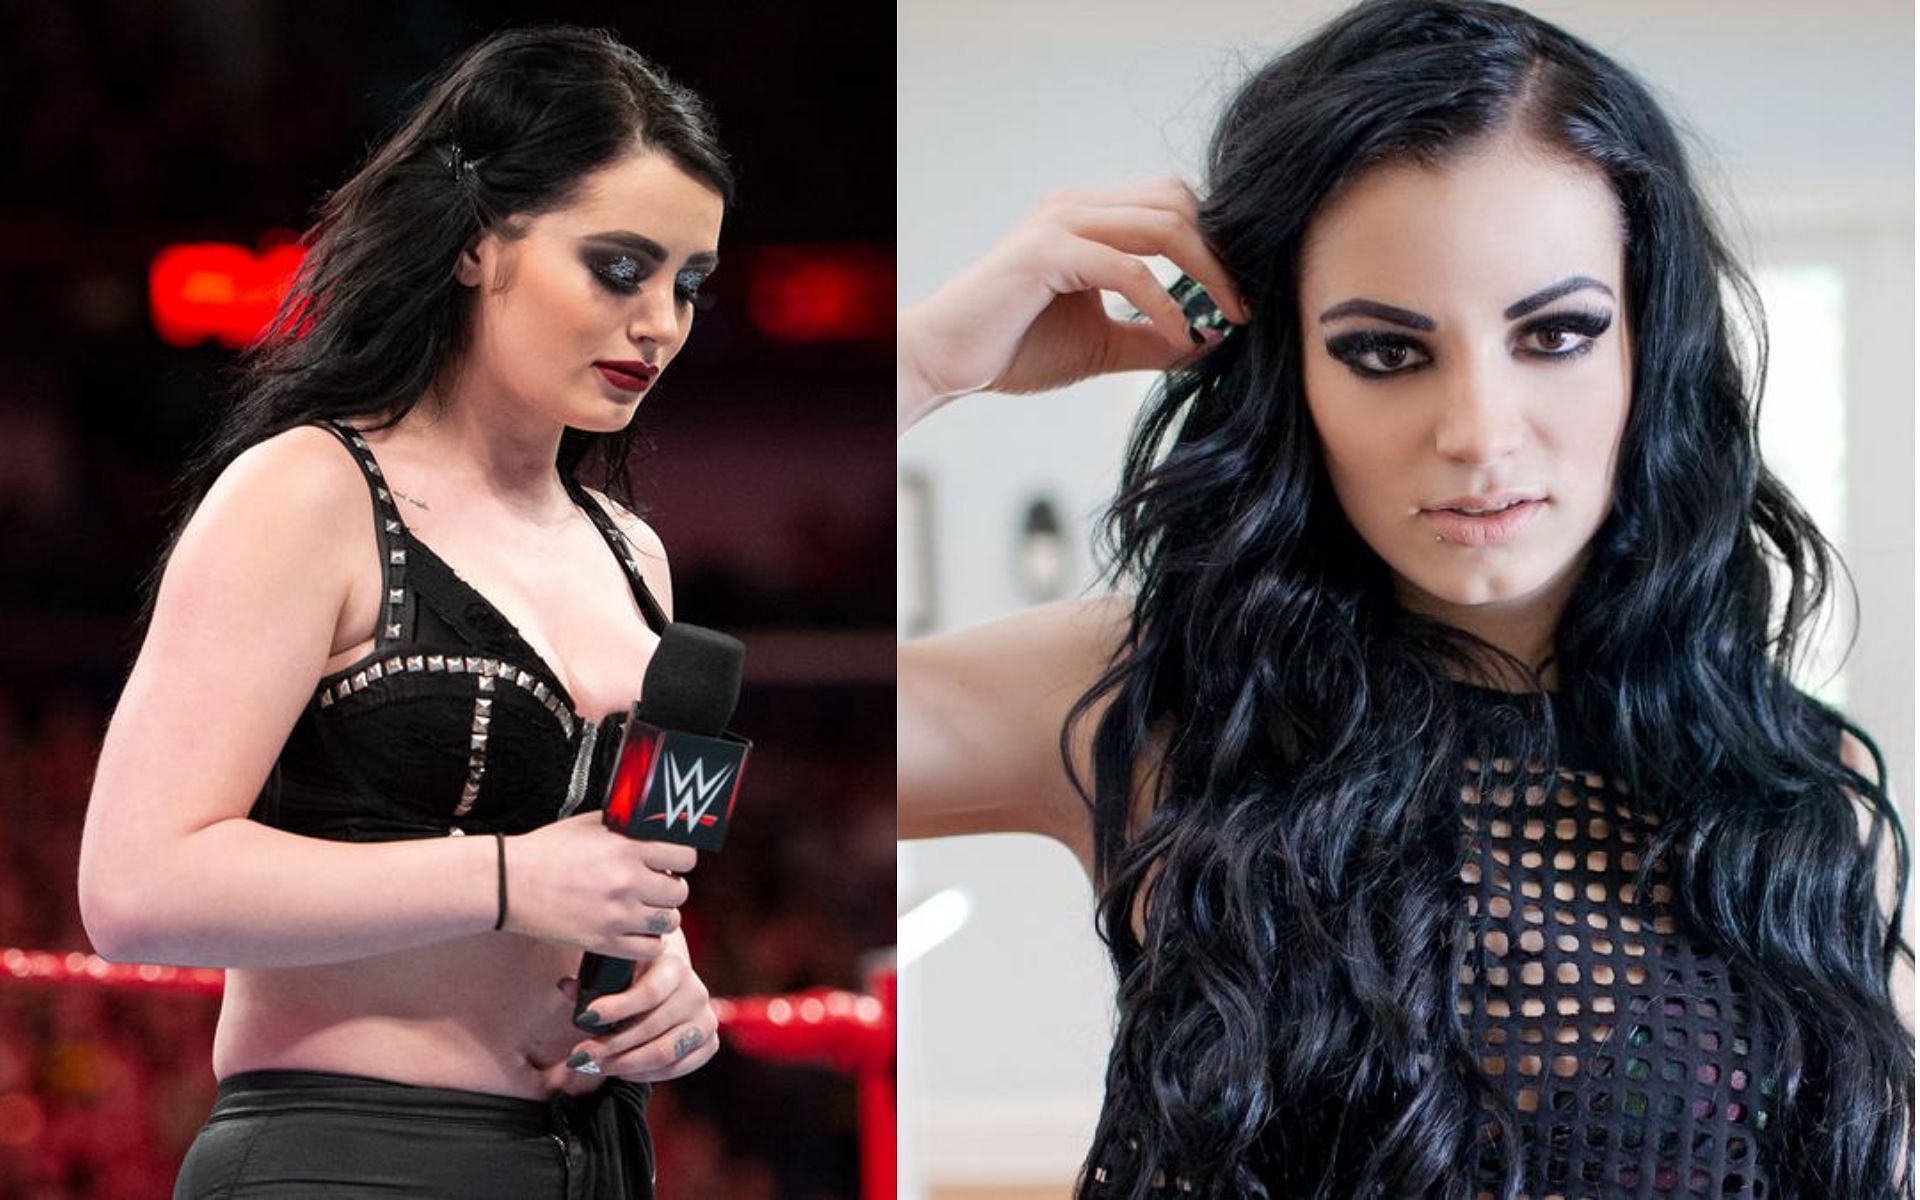 Paige officially retired from in-ring action in 2018